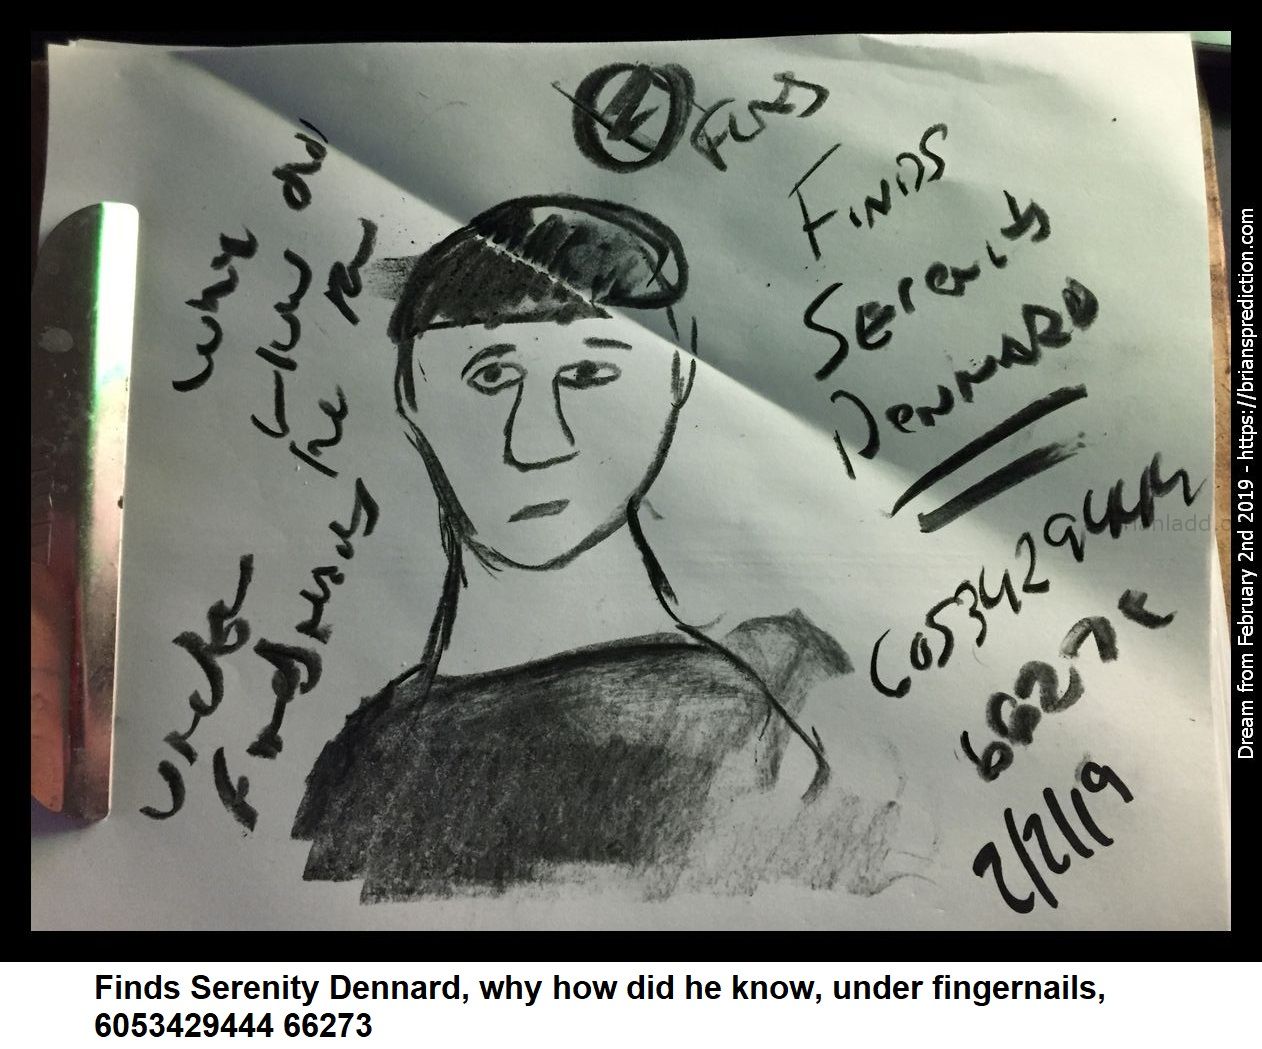 11646 2 February 2 2019 2 - Finds Serenity Dennard, Why How Did He Know, Under Fingernails, 6053429444 66273  Dream Numb...
Finds Serenity Dennard, Why How Did He Know, Under Fingernails, 6053429444 66273  Dream Number 11646 2 February 2 2019 2 Psychic Prediction
